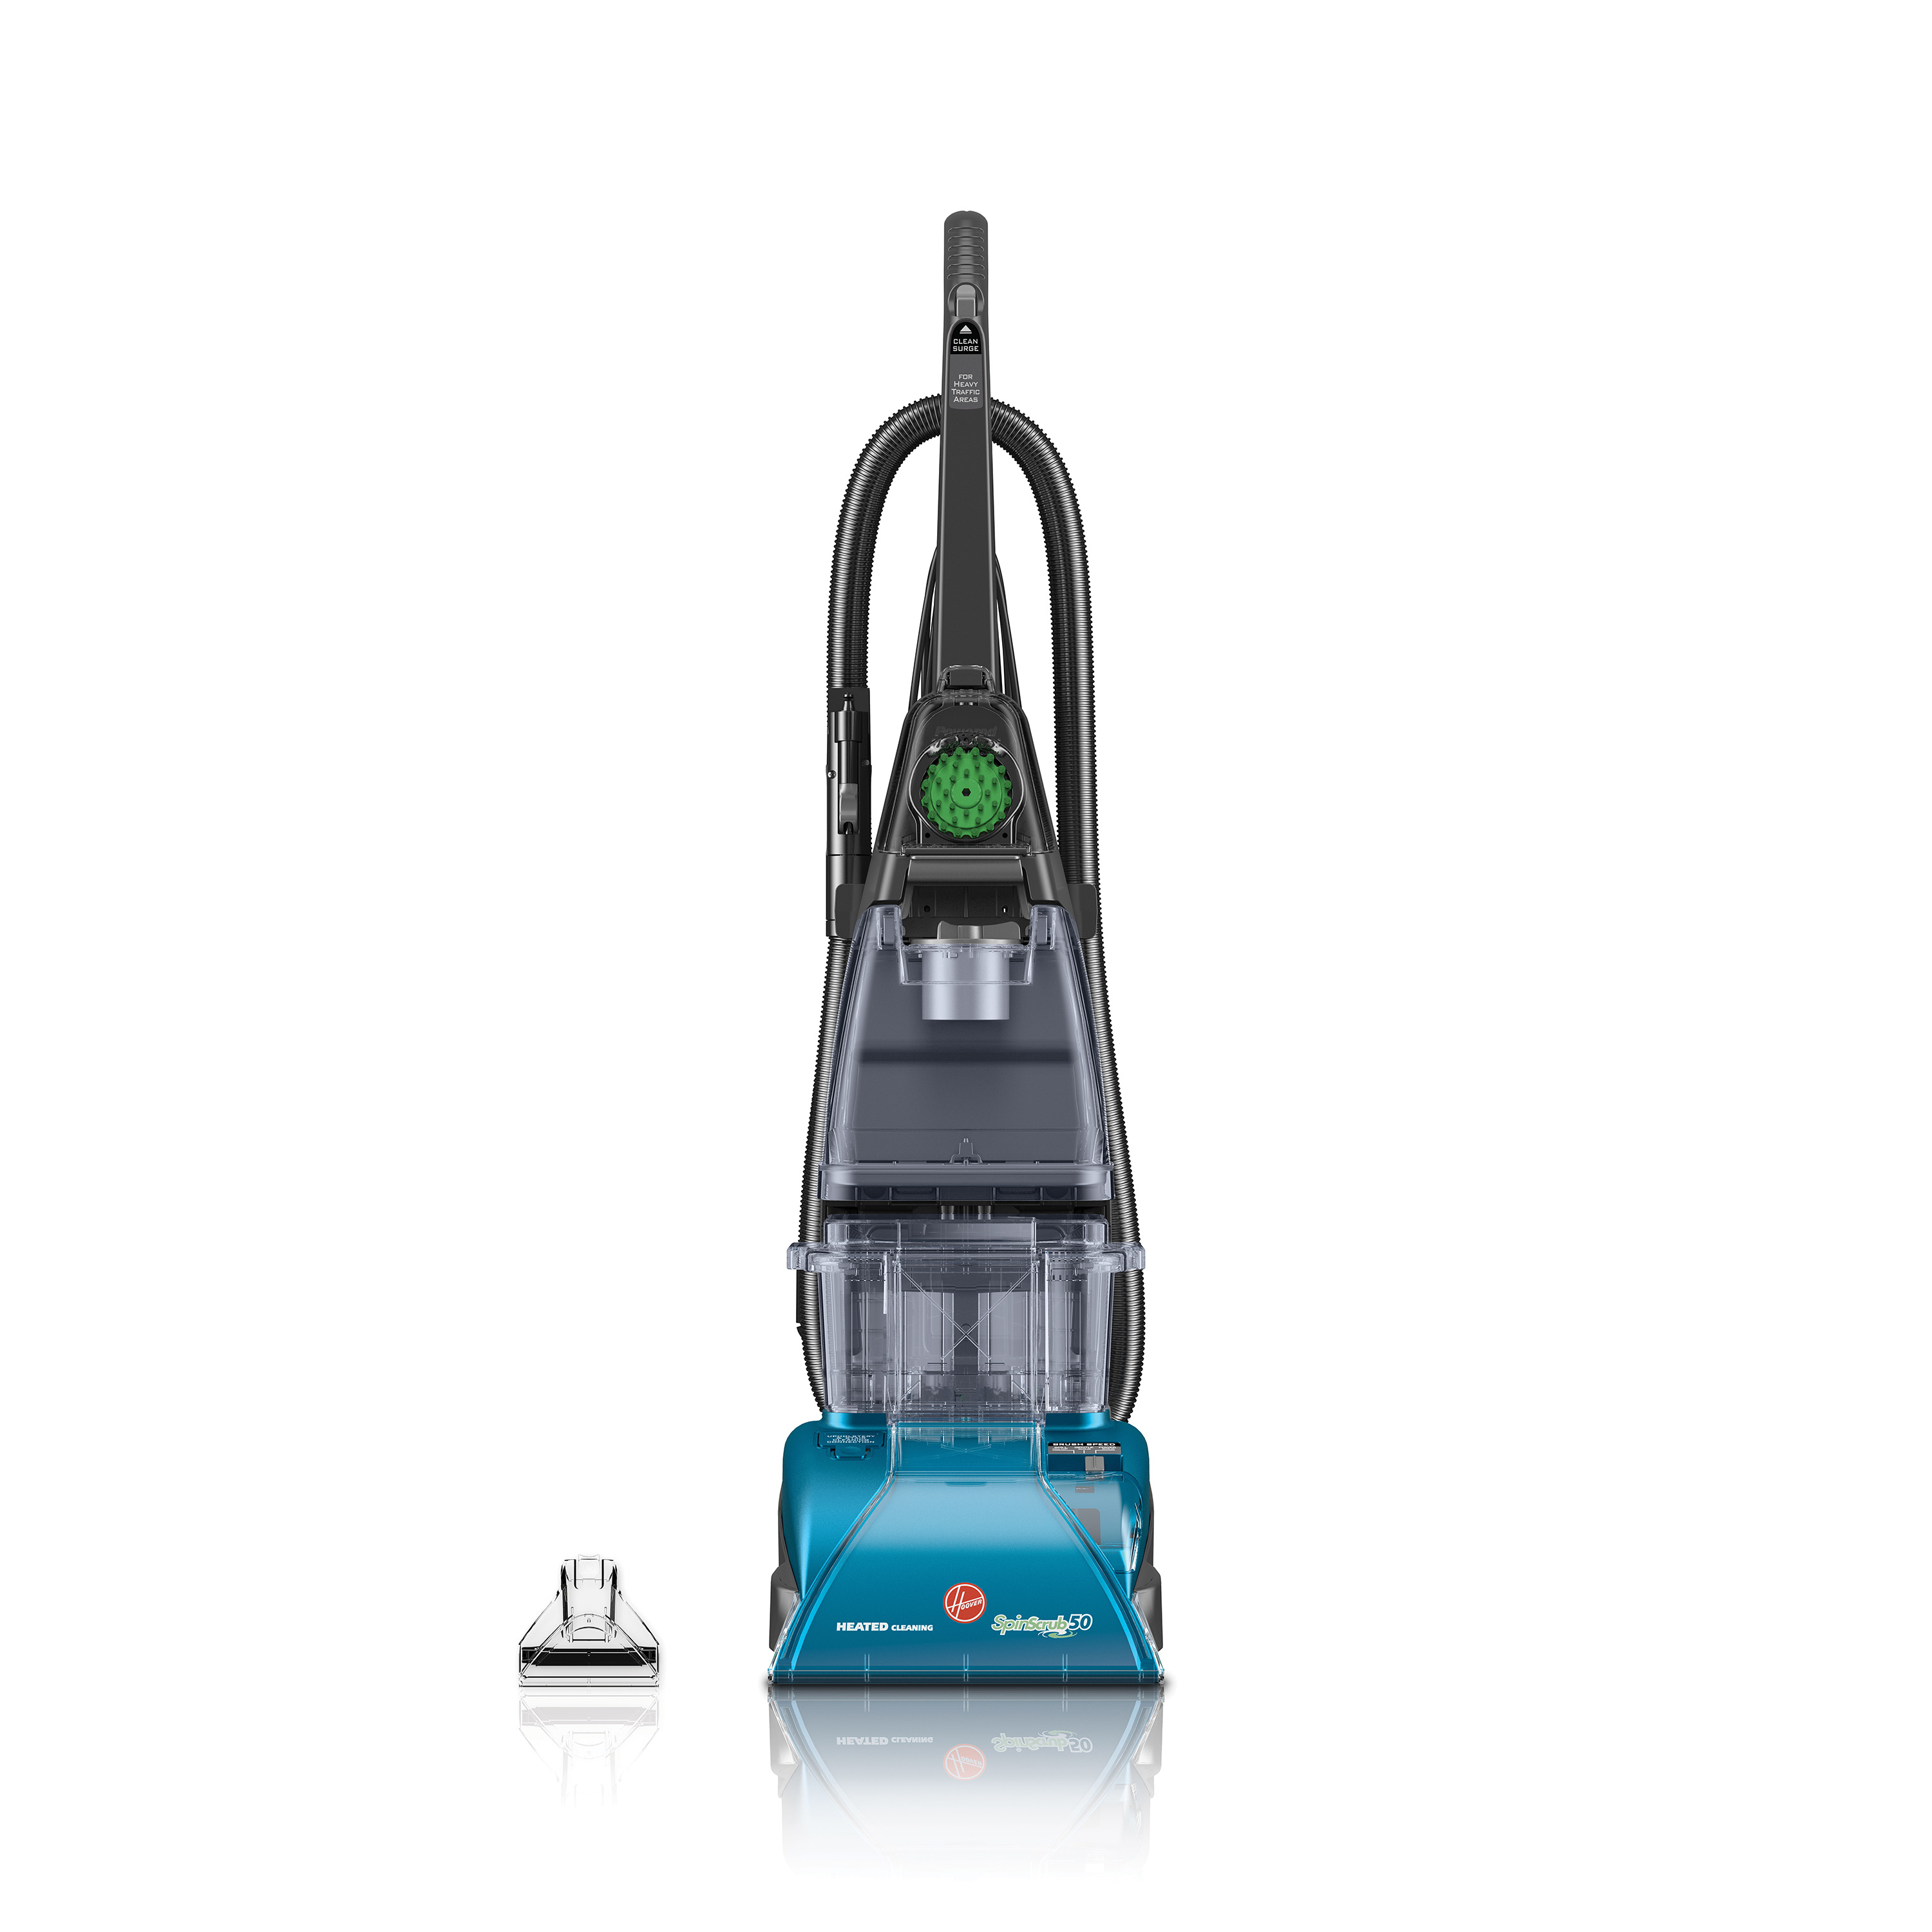 Hoover SteamVac with CleanSurge Carpet Cleaner, F5914900 - image 1 of 17